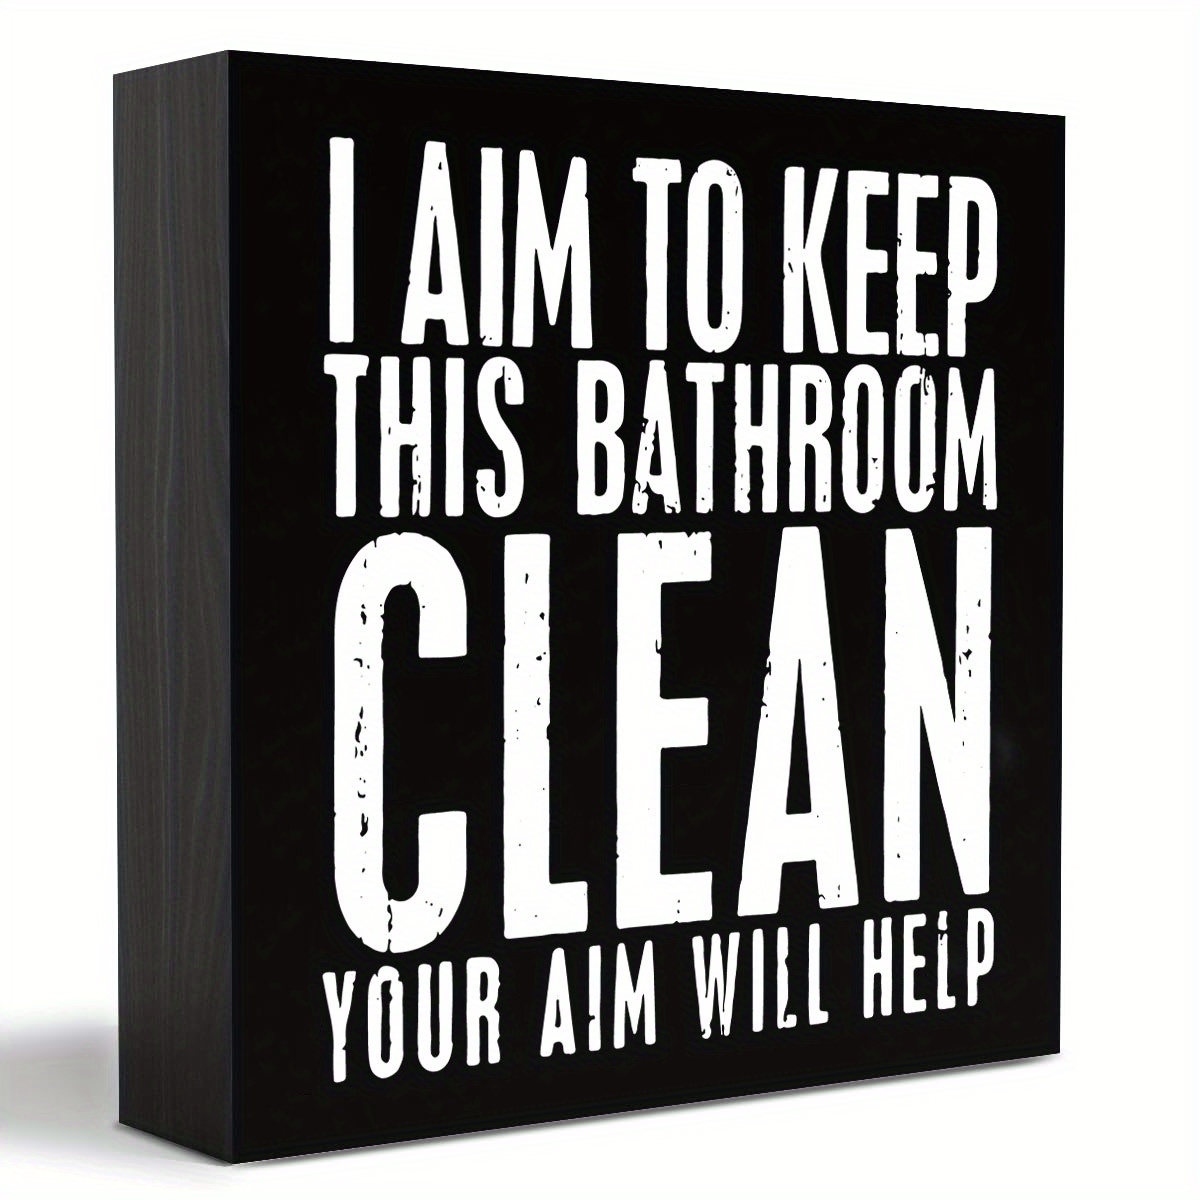 

1pc Funny Bathroom Signs Clean You Aim Will Help Box Sign, Primitive Decor Office Desk Decorations Office, Bathroom Shelf Decor, Funny Office Decor Humor For Home Bedroom Living Room